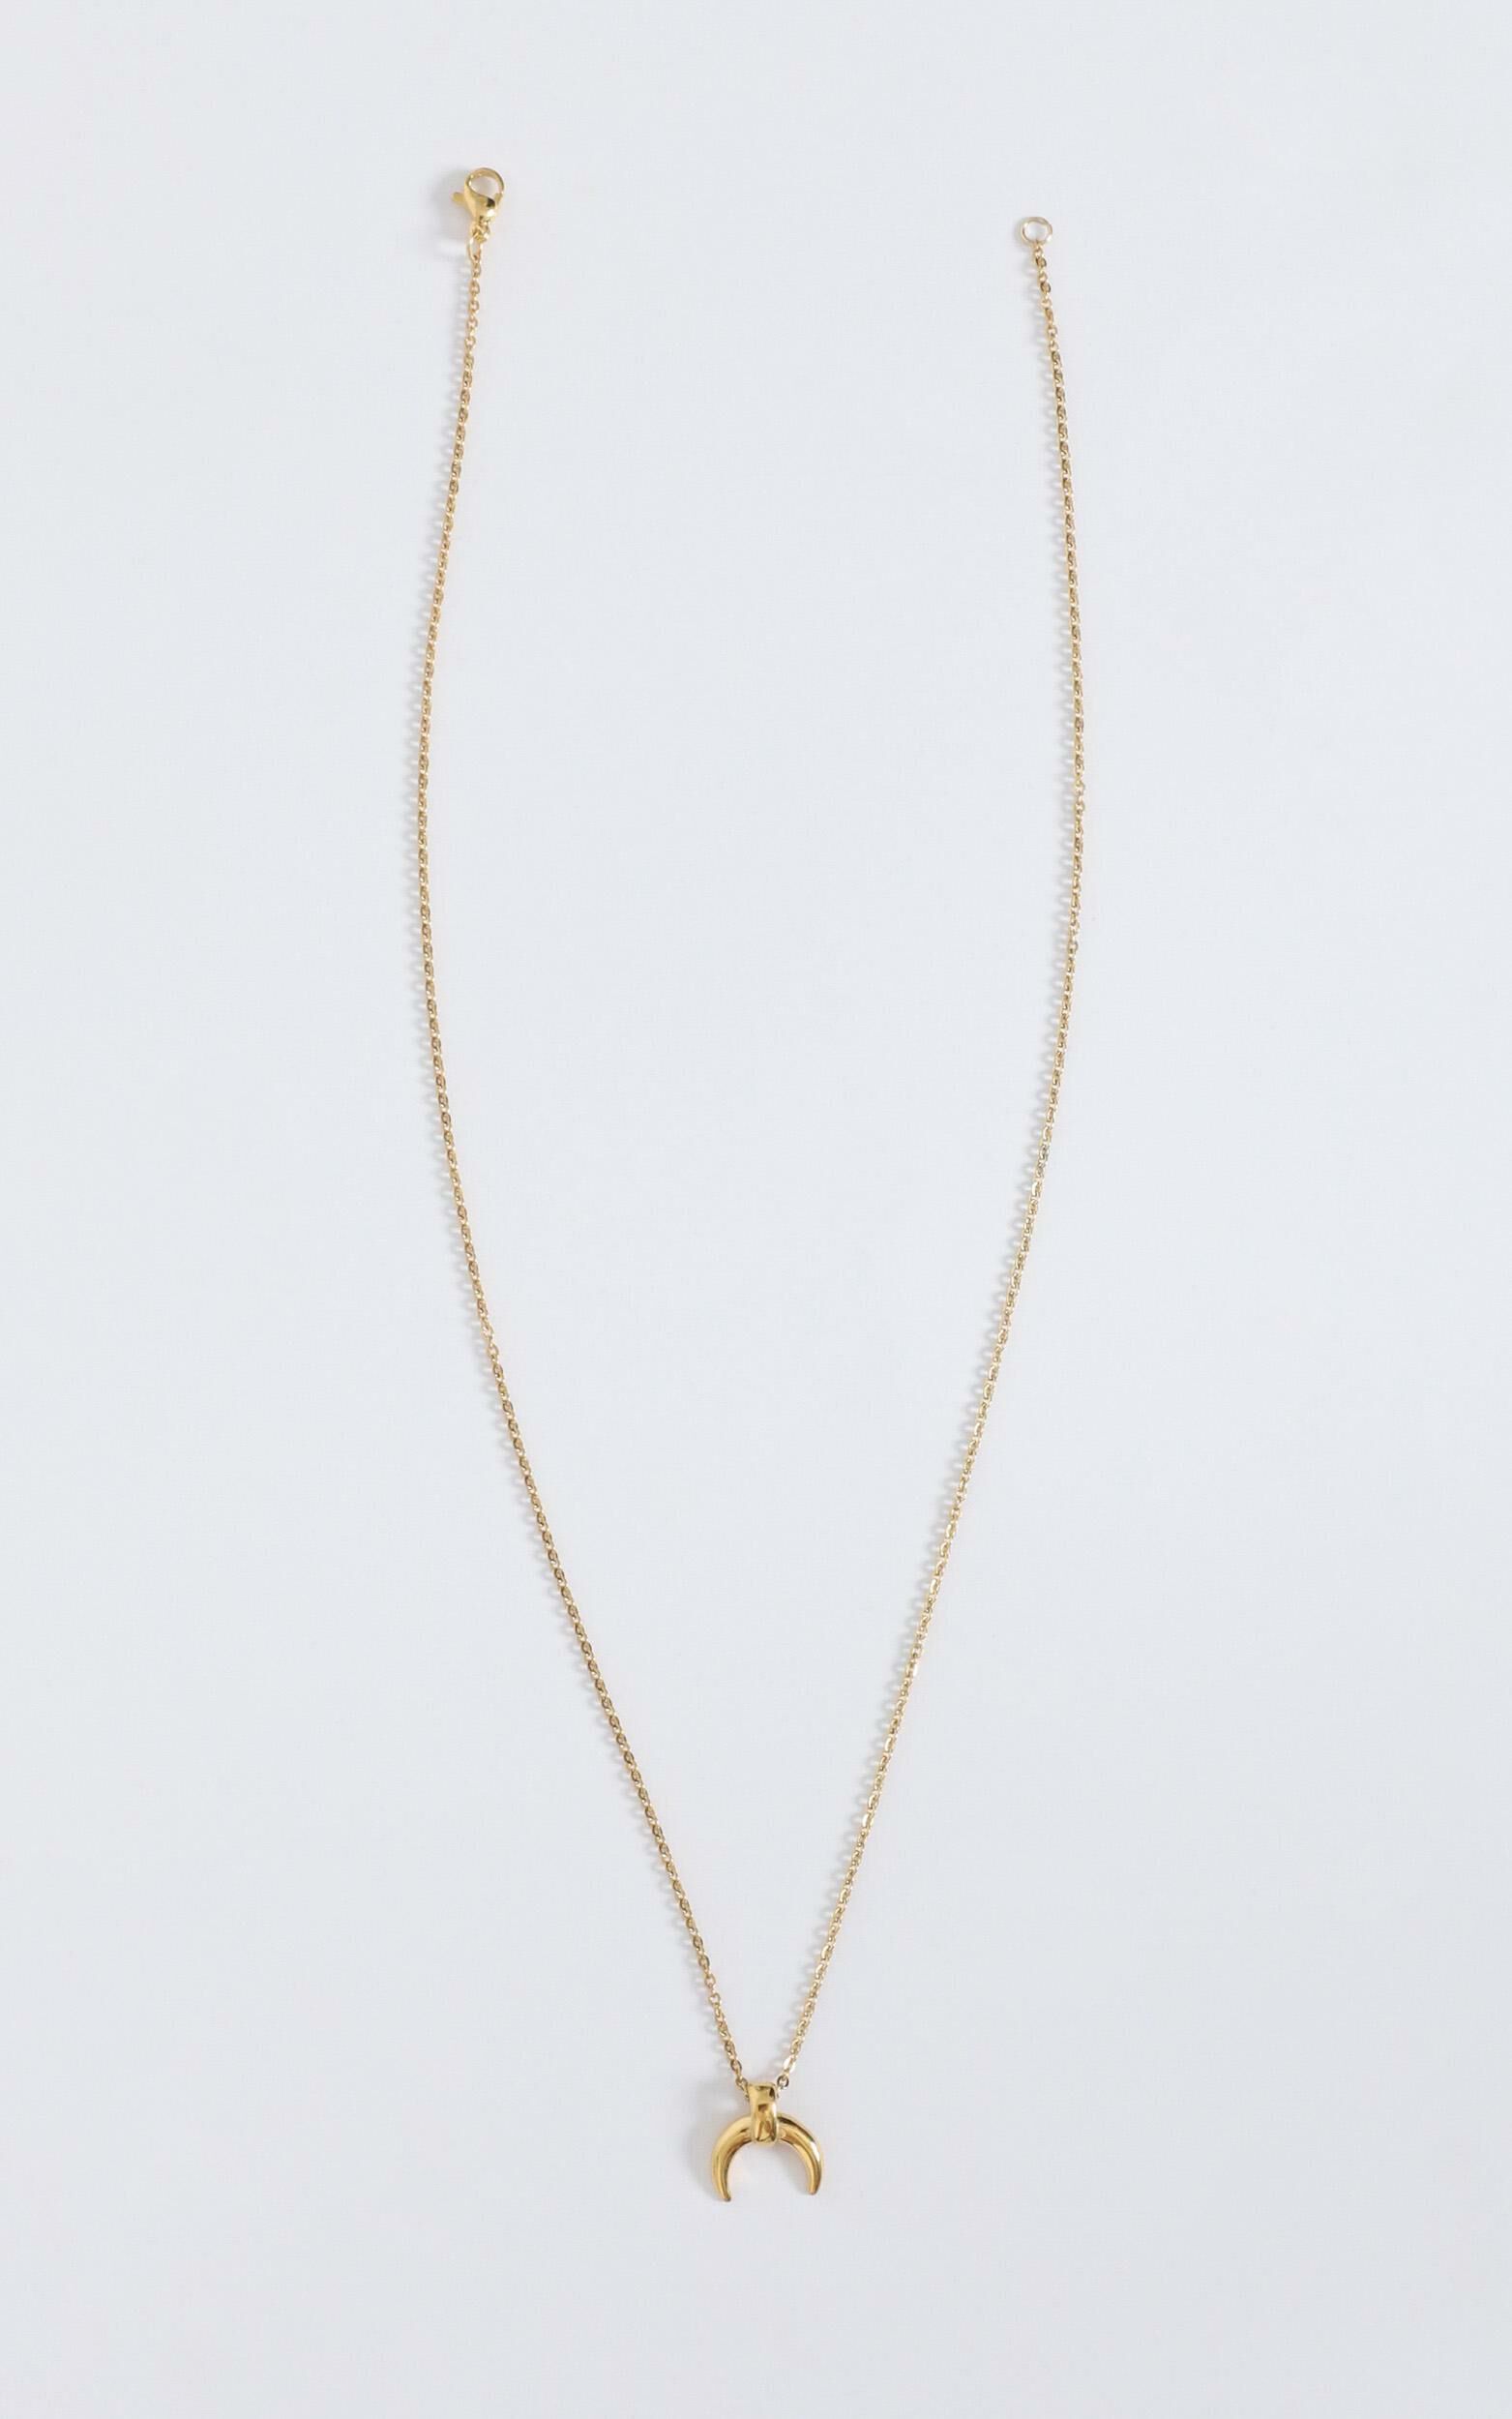 Peta And Jain - Sydni Necklace in Gold, GLD1